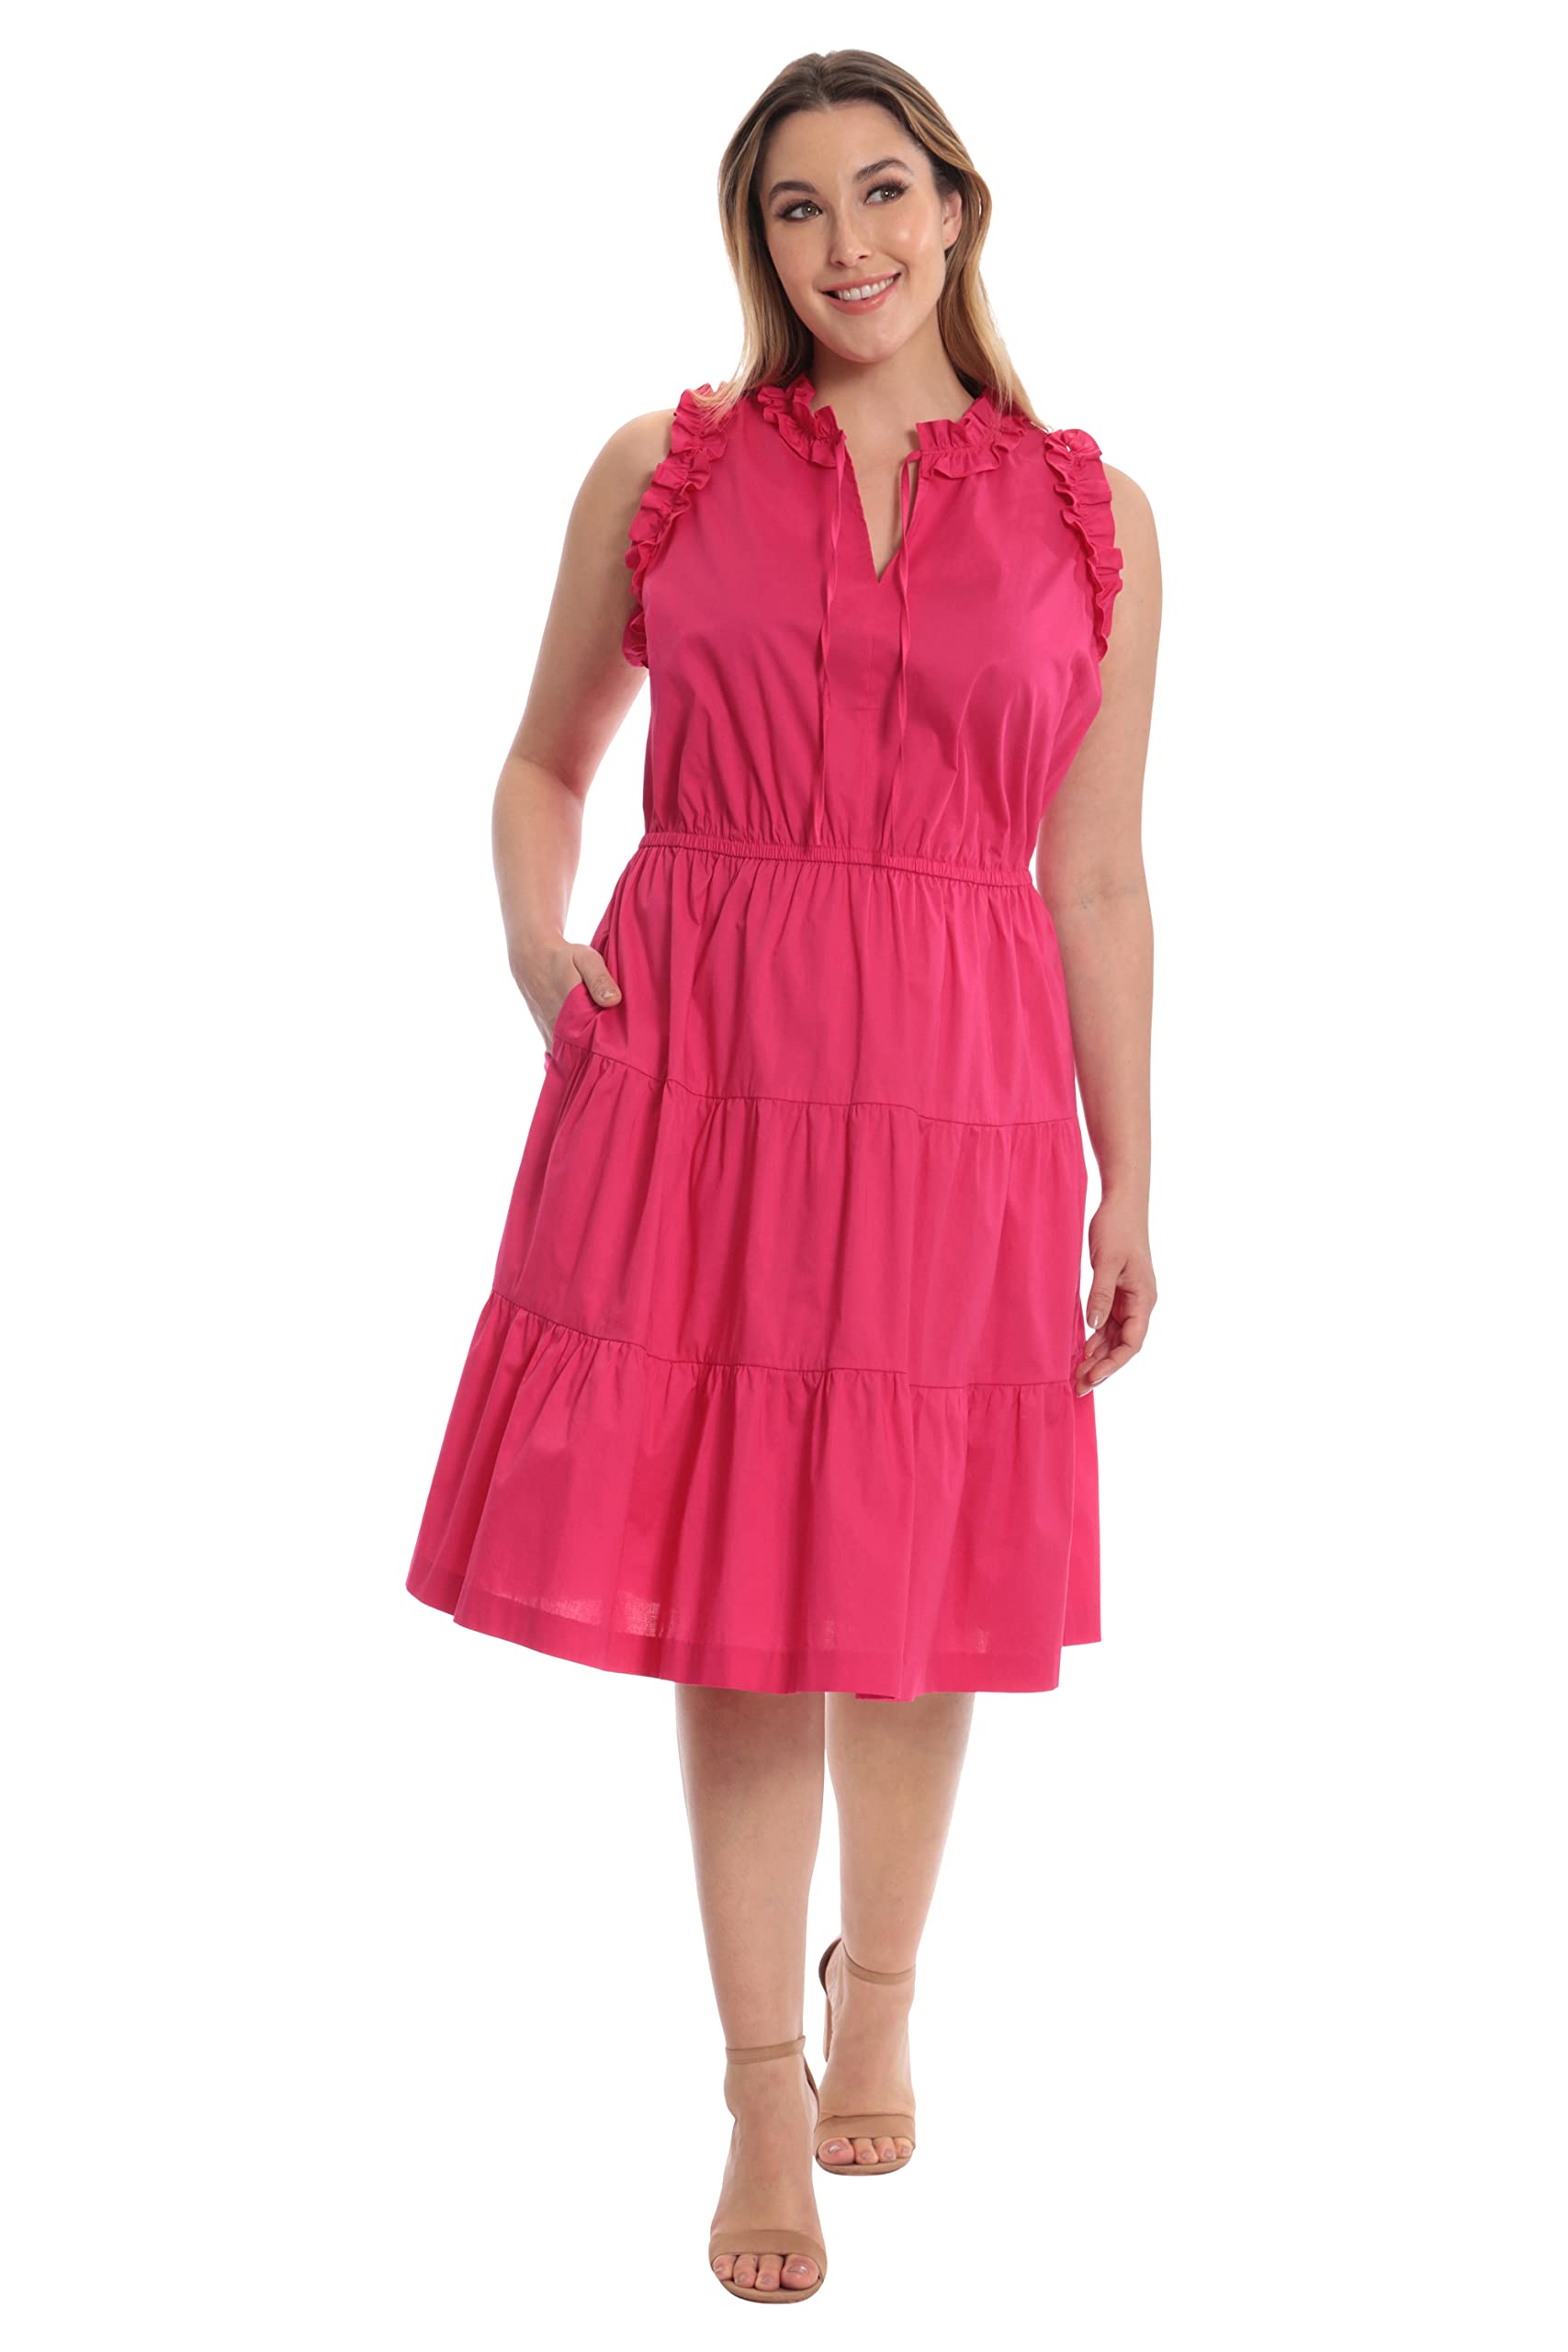 Maggy London Women's V-Neck Tiered Skirt Dress with Tie and Ruffle Details